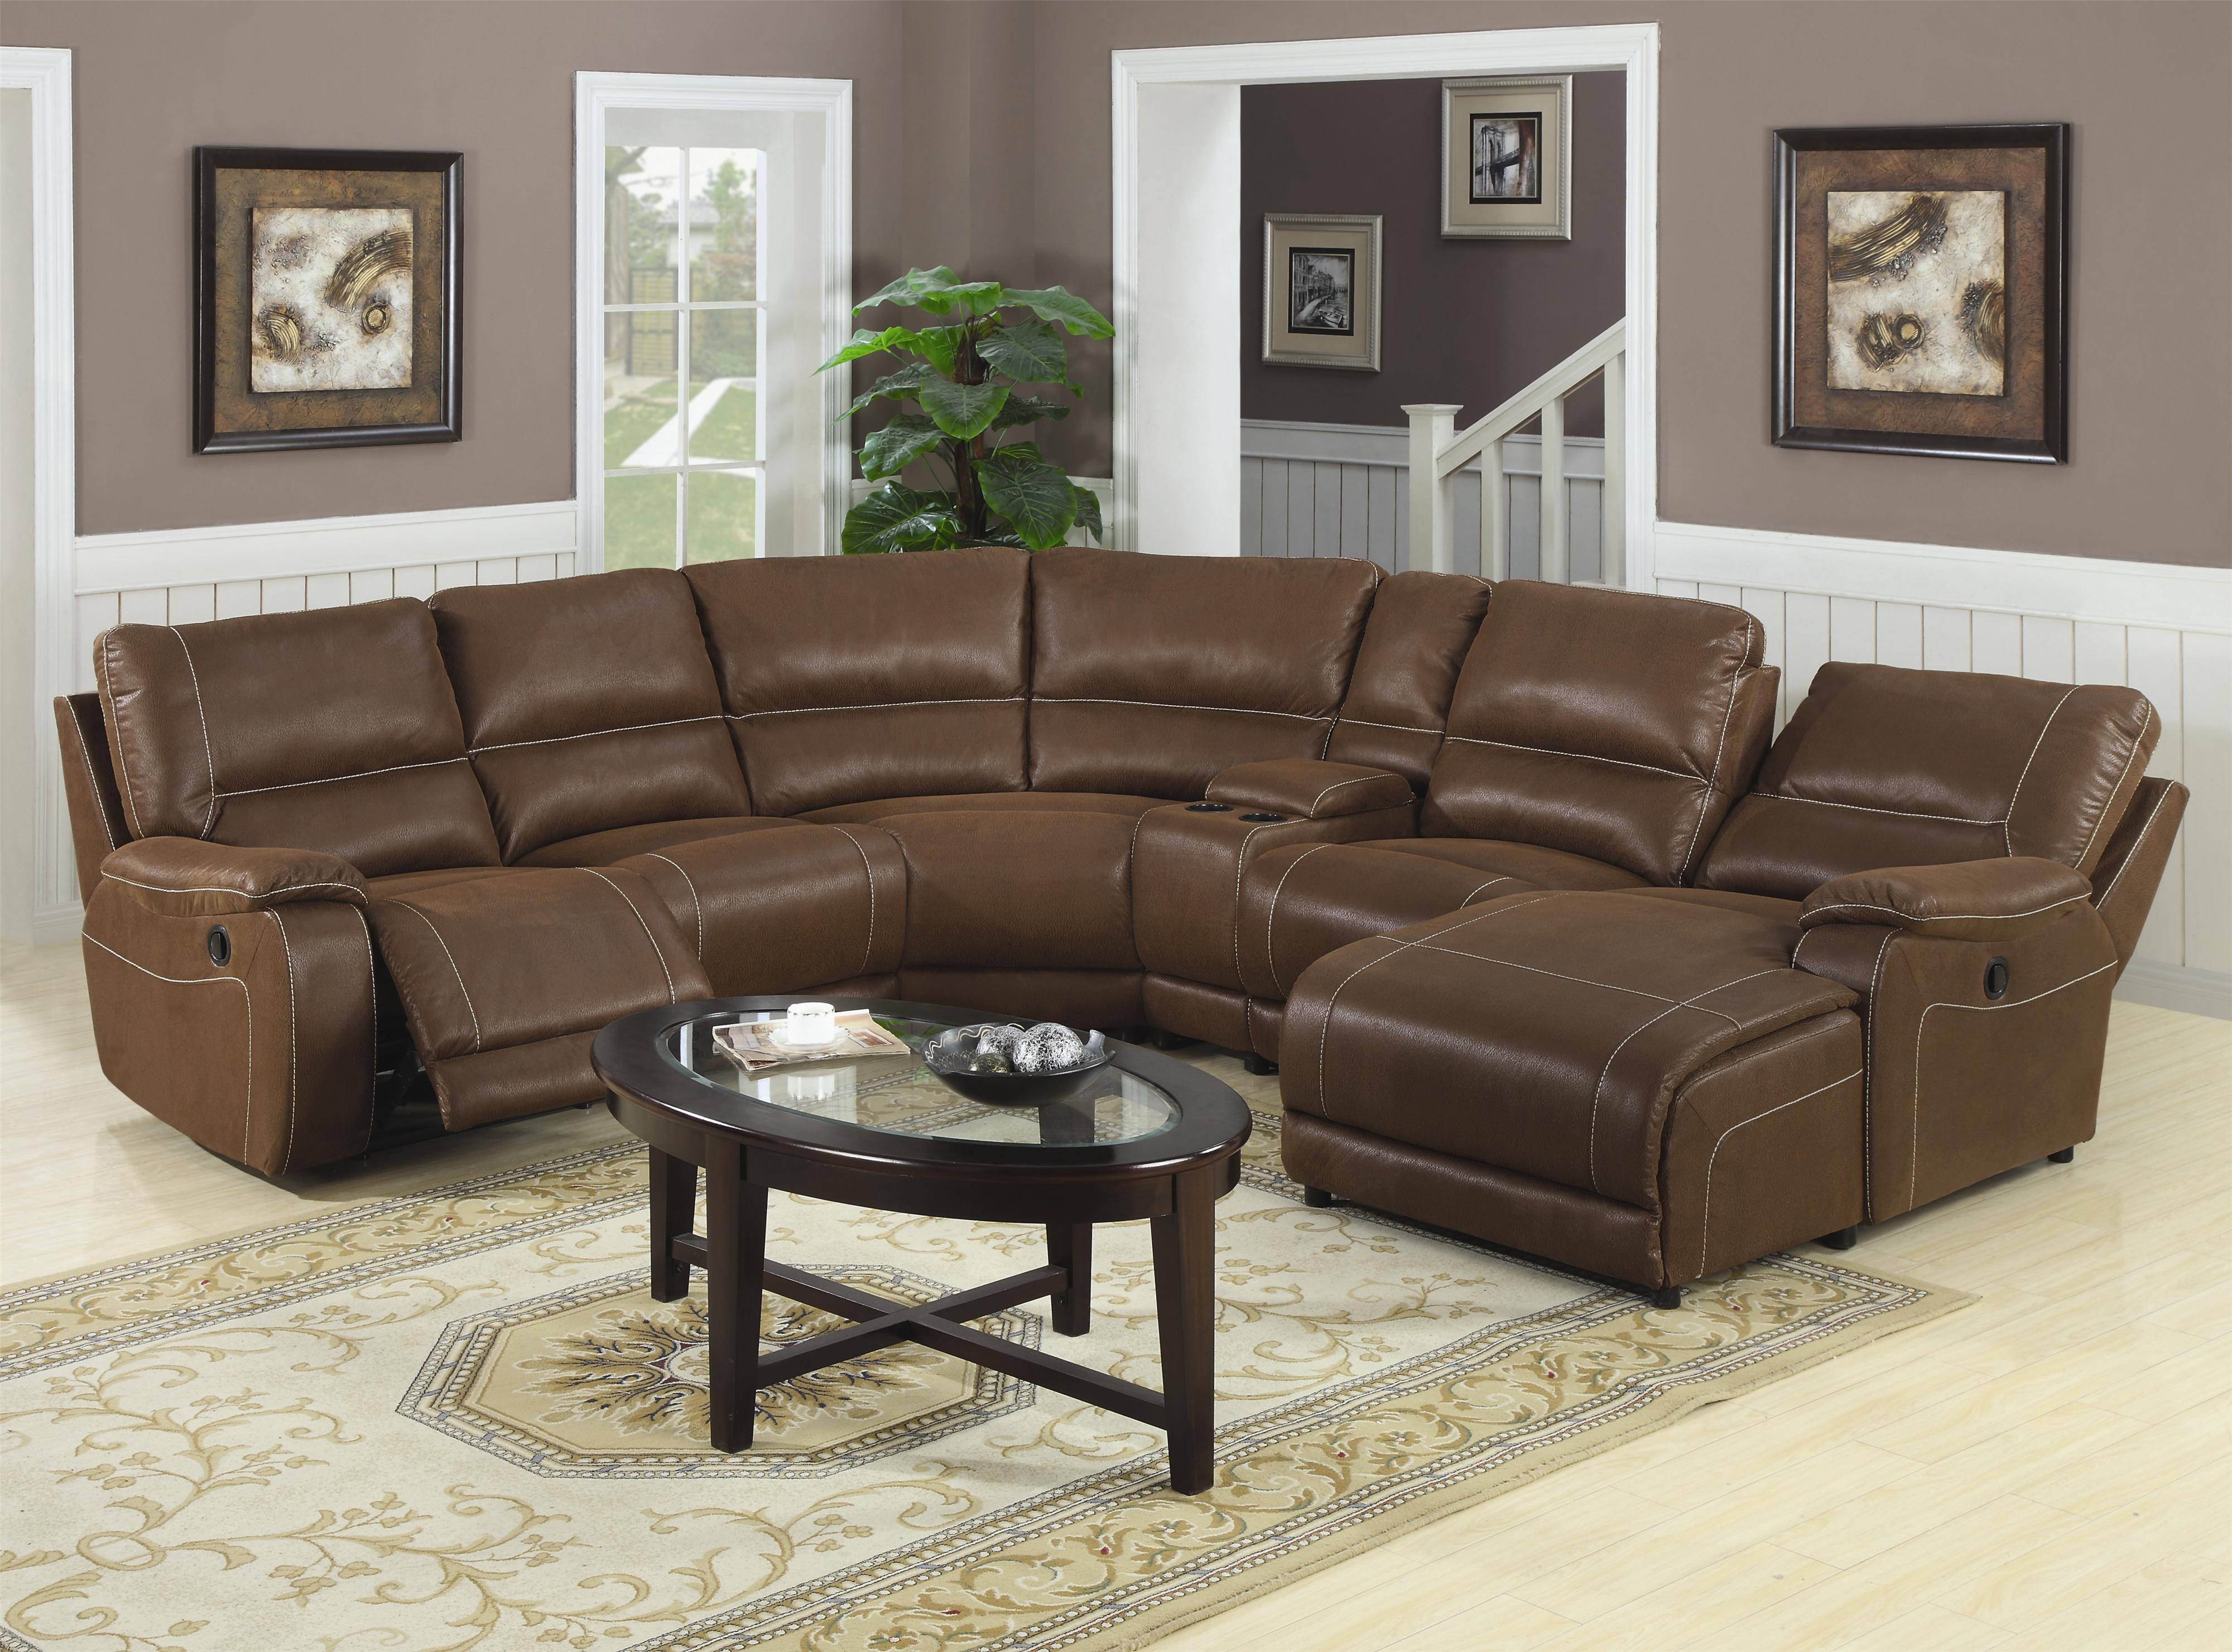 gavin leather chaise sectional sofa 3 piece